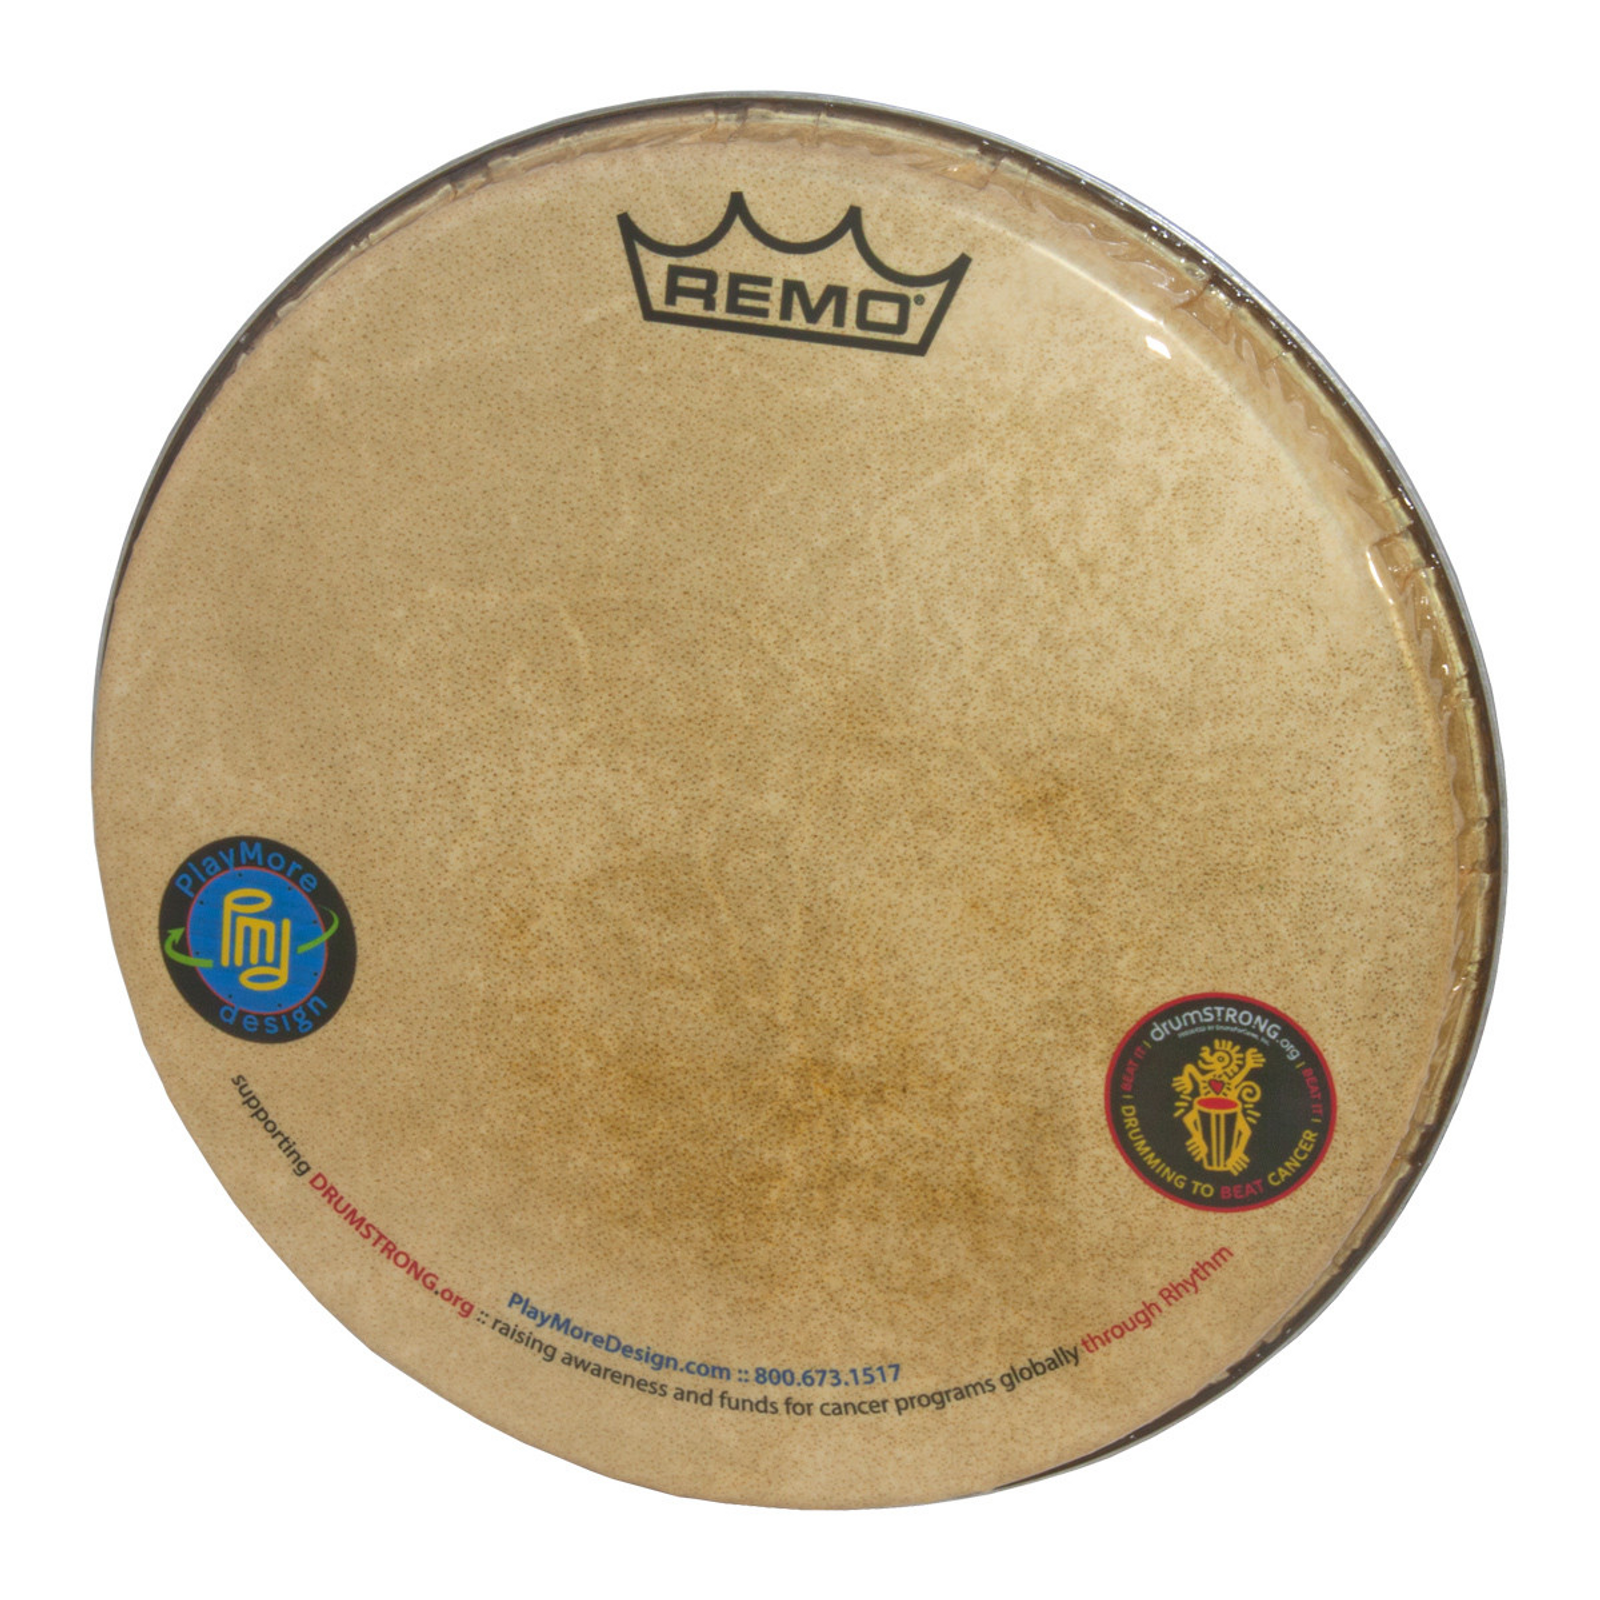 Remo Skyndeep Doumbek Head 10-Inch x 3/4-Inch - M5 Type, Playmore and DRUMSTRONG